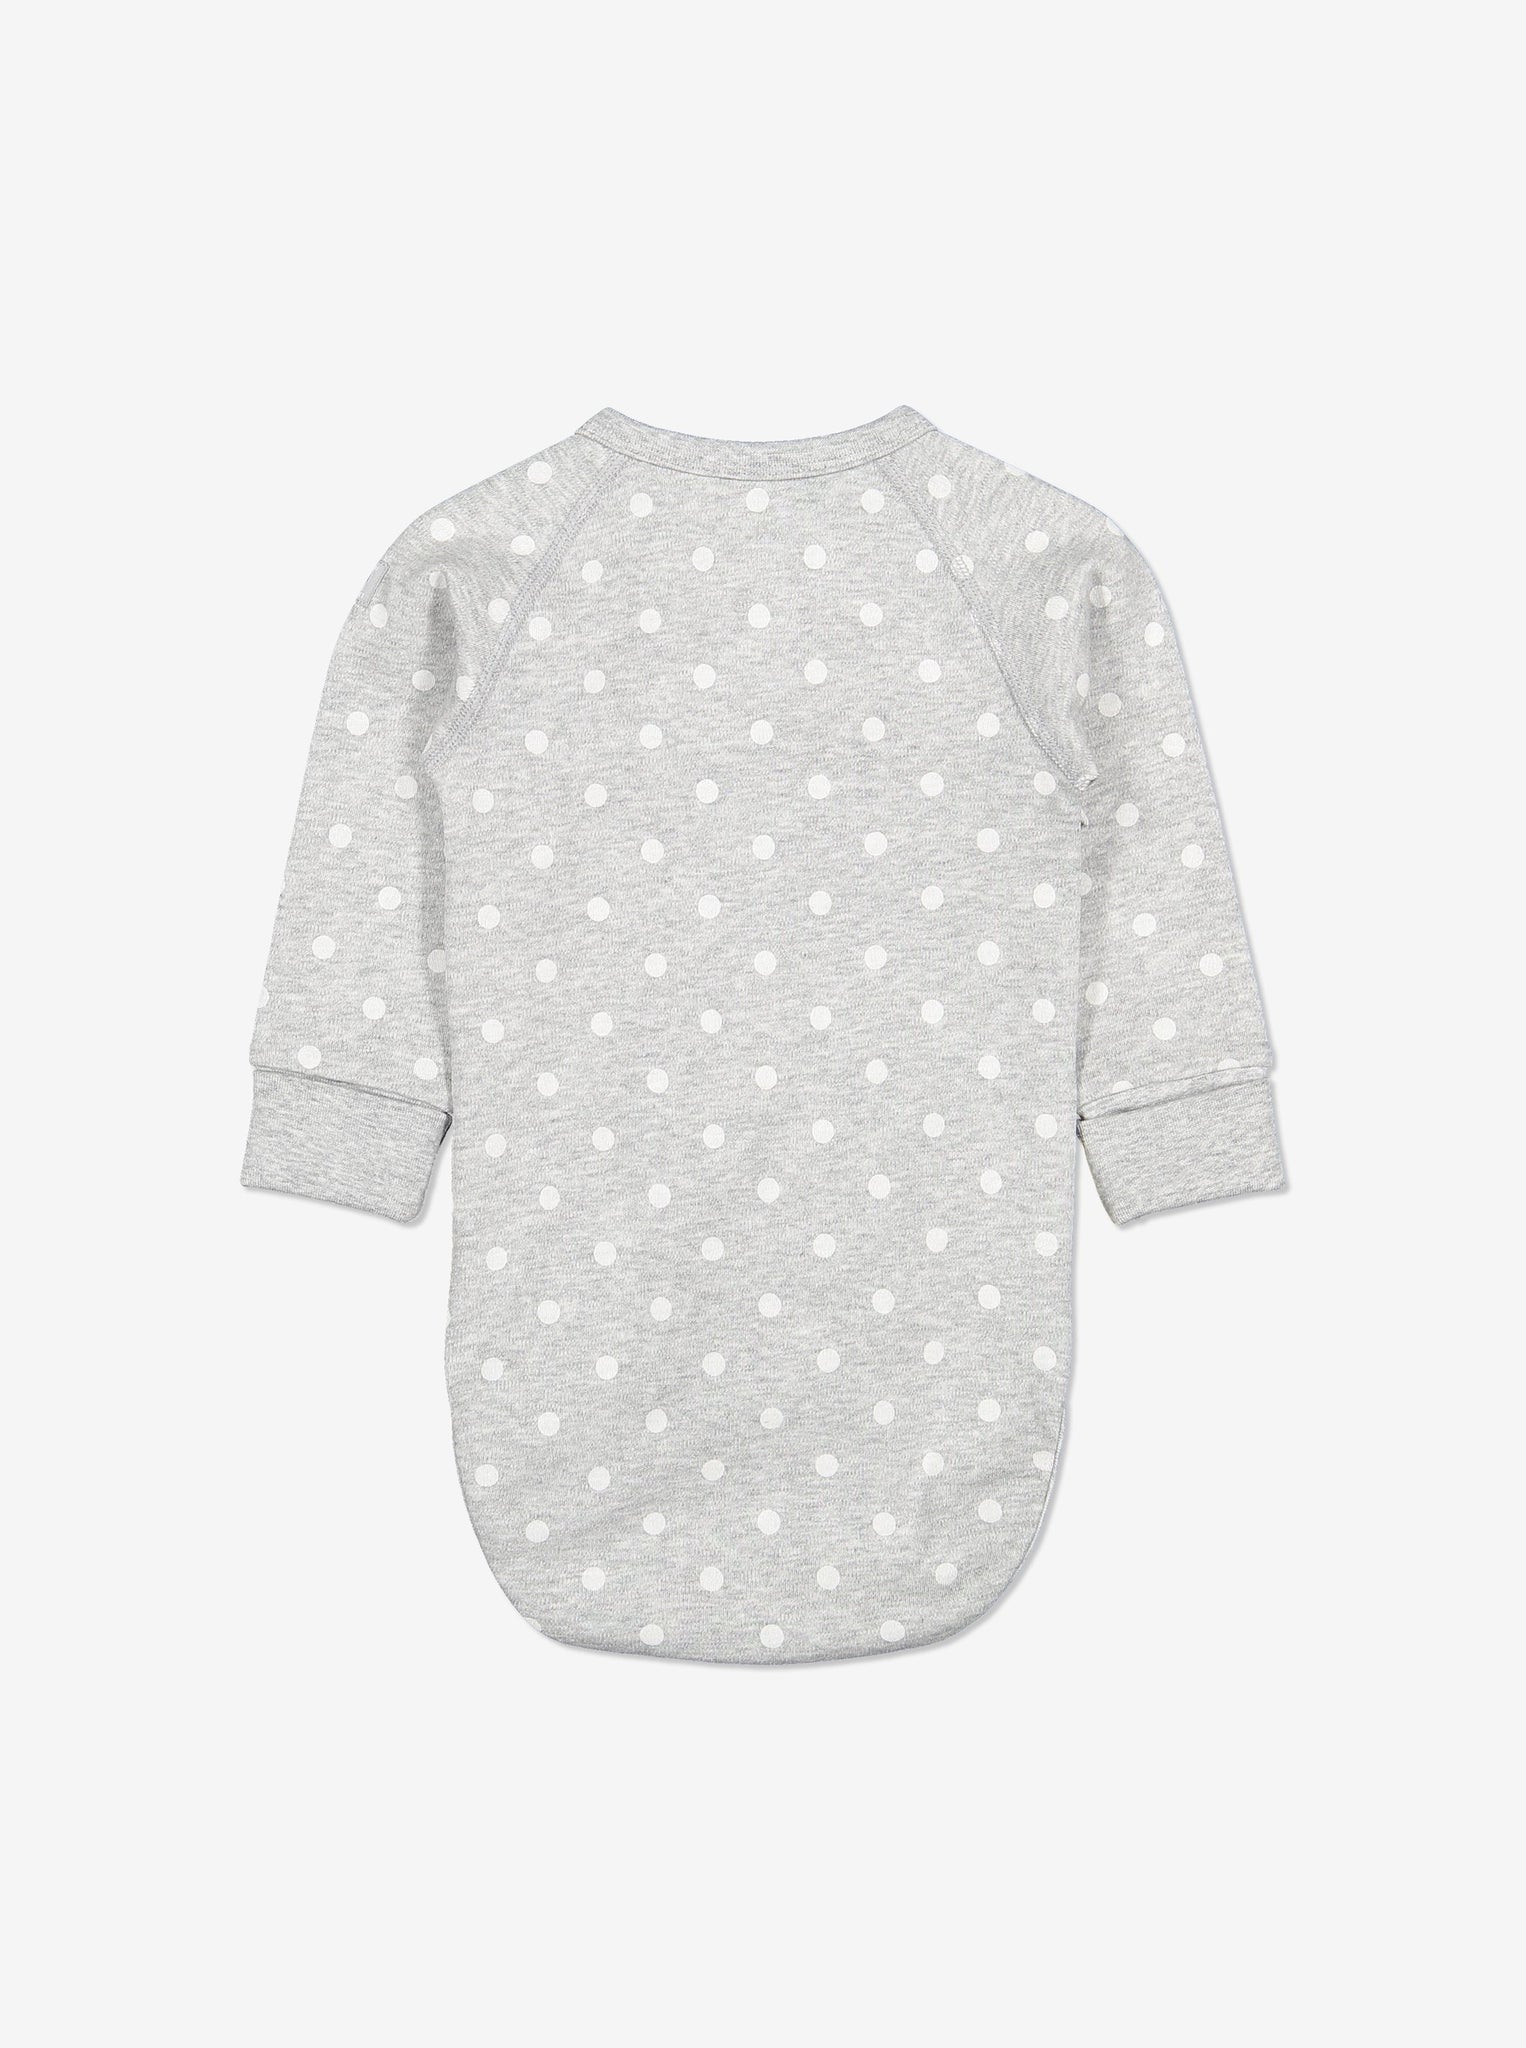 Embroidered Pear Wrapround Baby Bodysuit-Unisex-0-6m-Grey